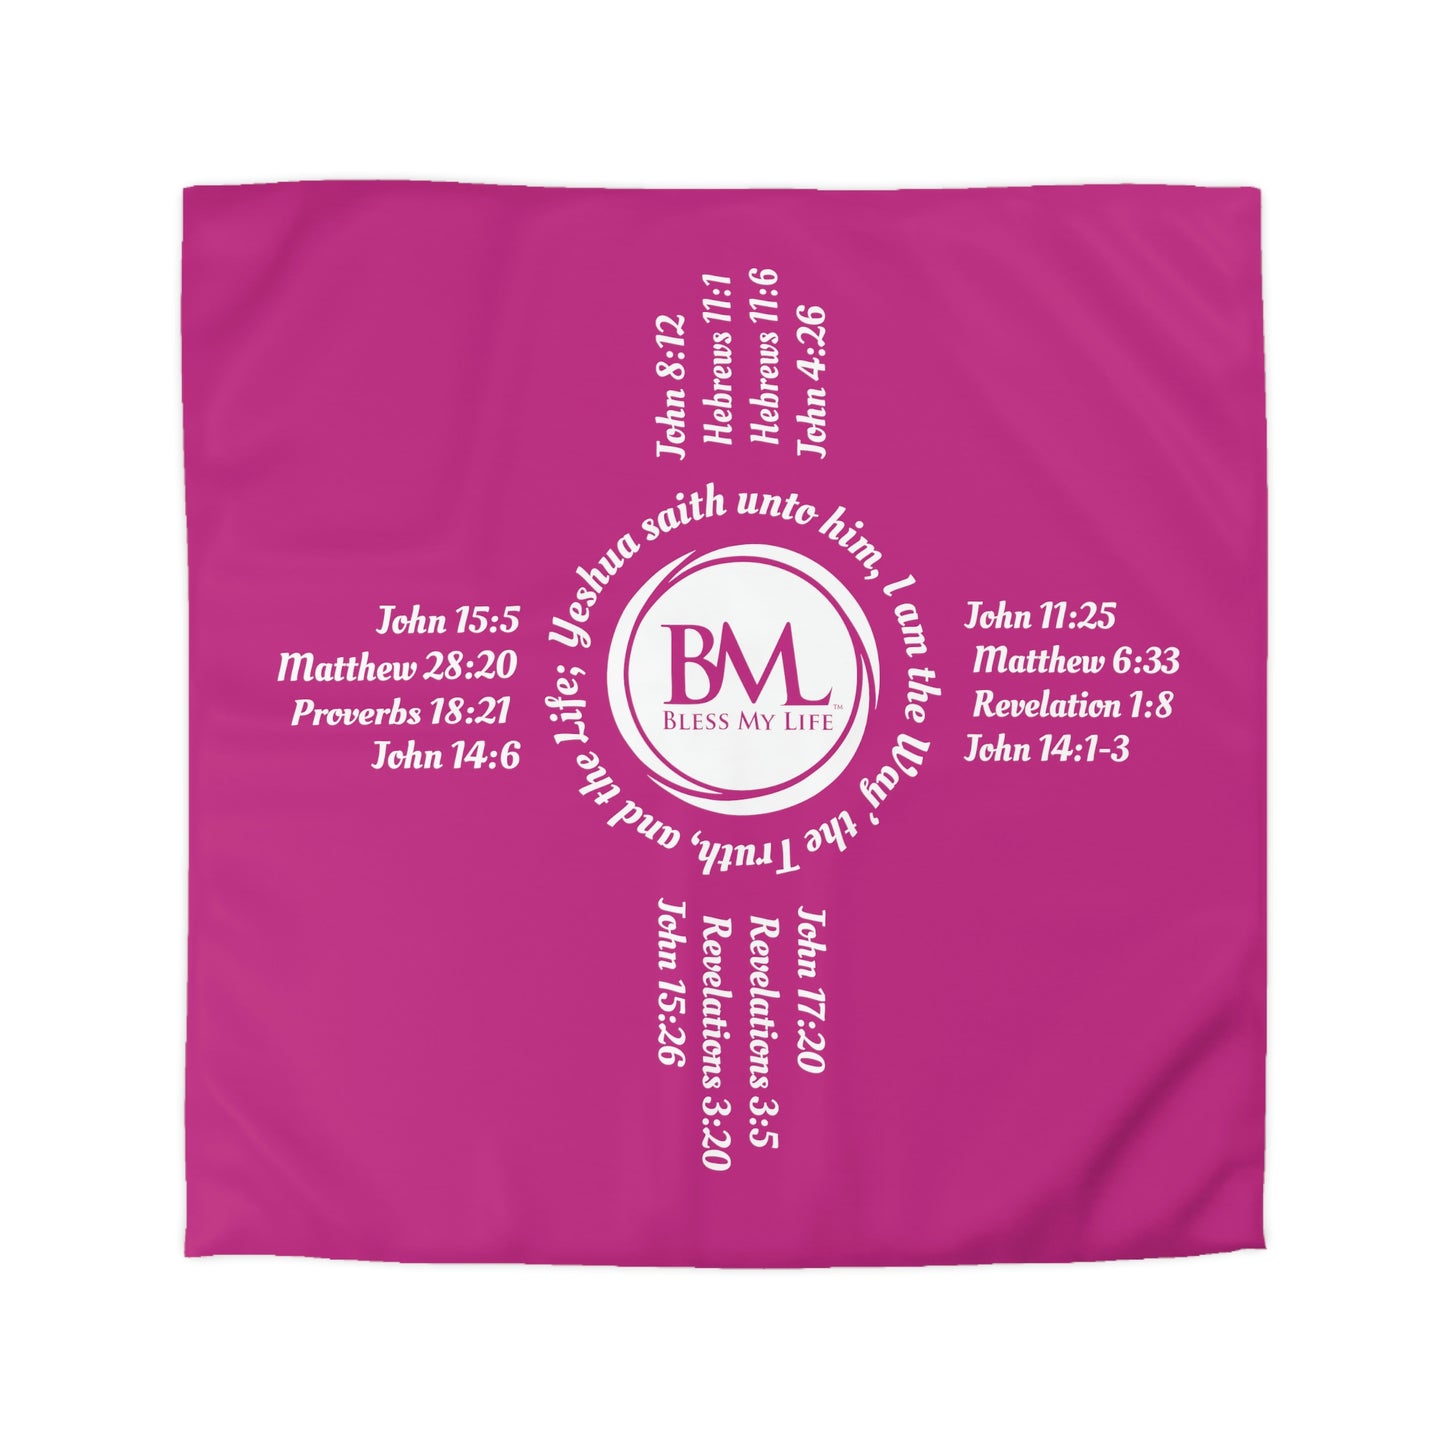 Literally COVER Yourself with Biblical Scriptures with this Zia Symbol Microfiber Duvet Cover, A New Mexico Icon & Favorite! Pink Cover with White Zia!